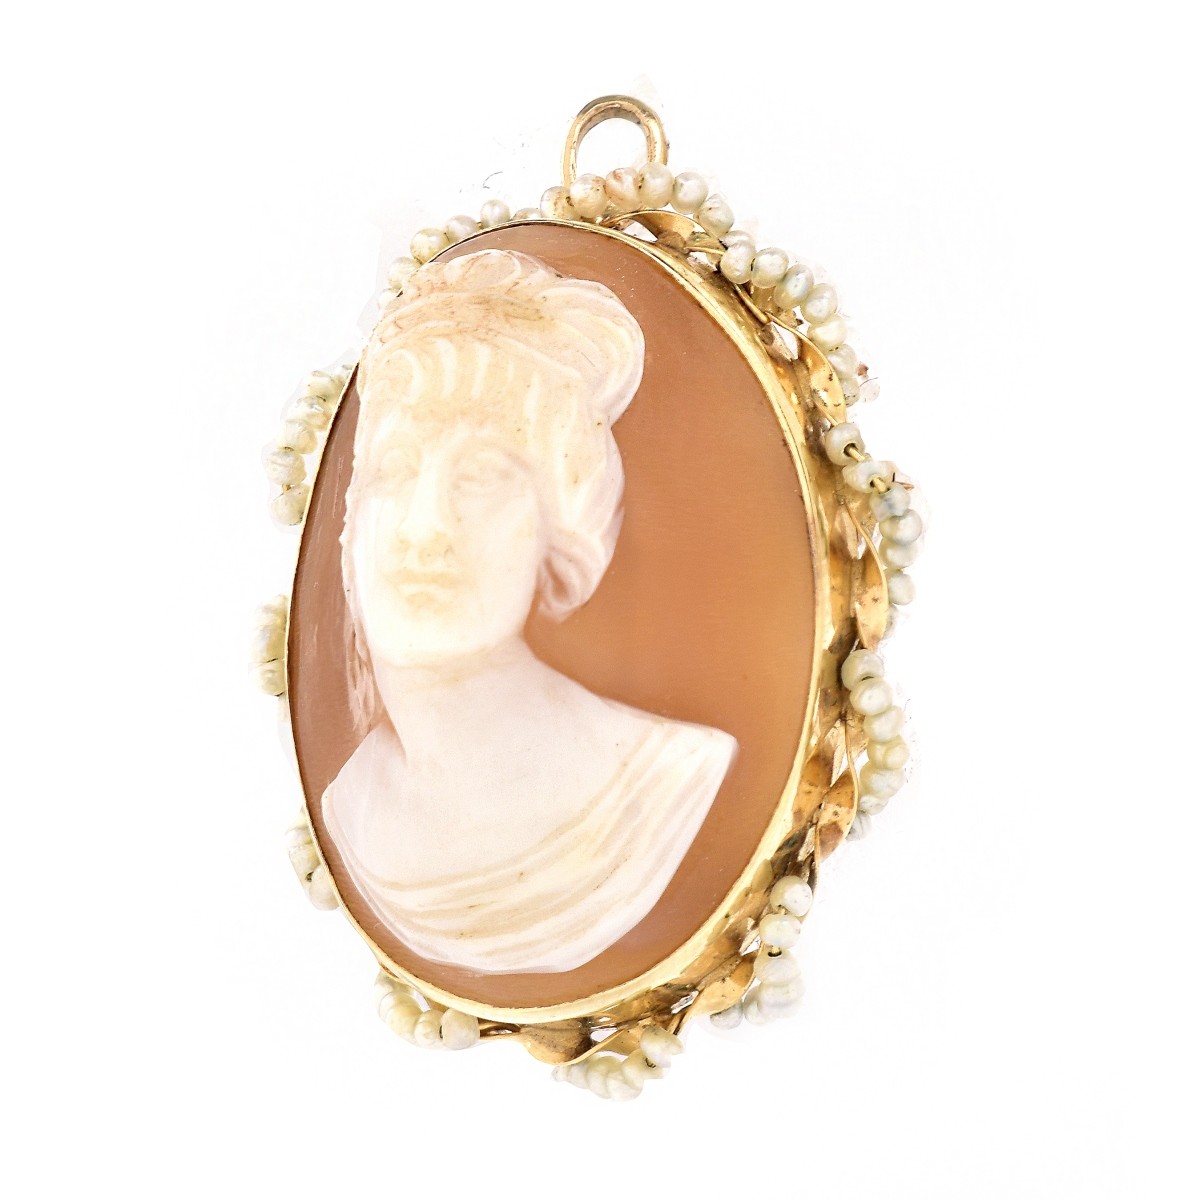 14K Gold and Seed Pearl Cameo Pendant Brooch - Image 2 of 5